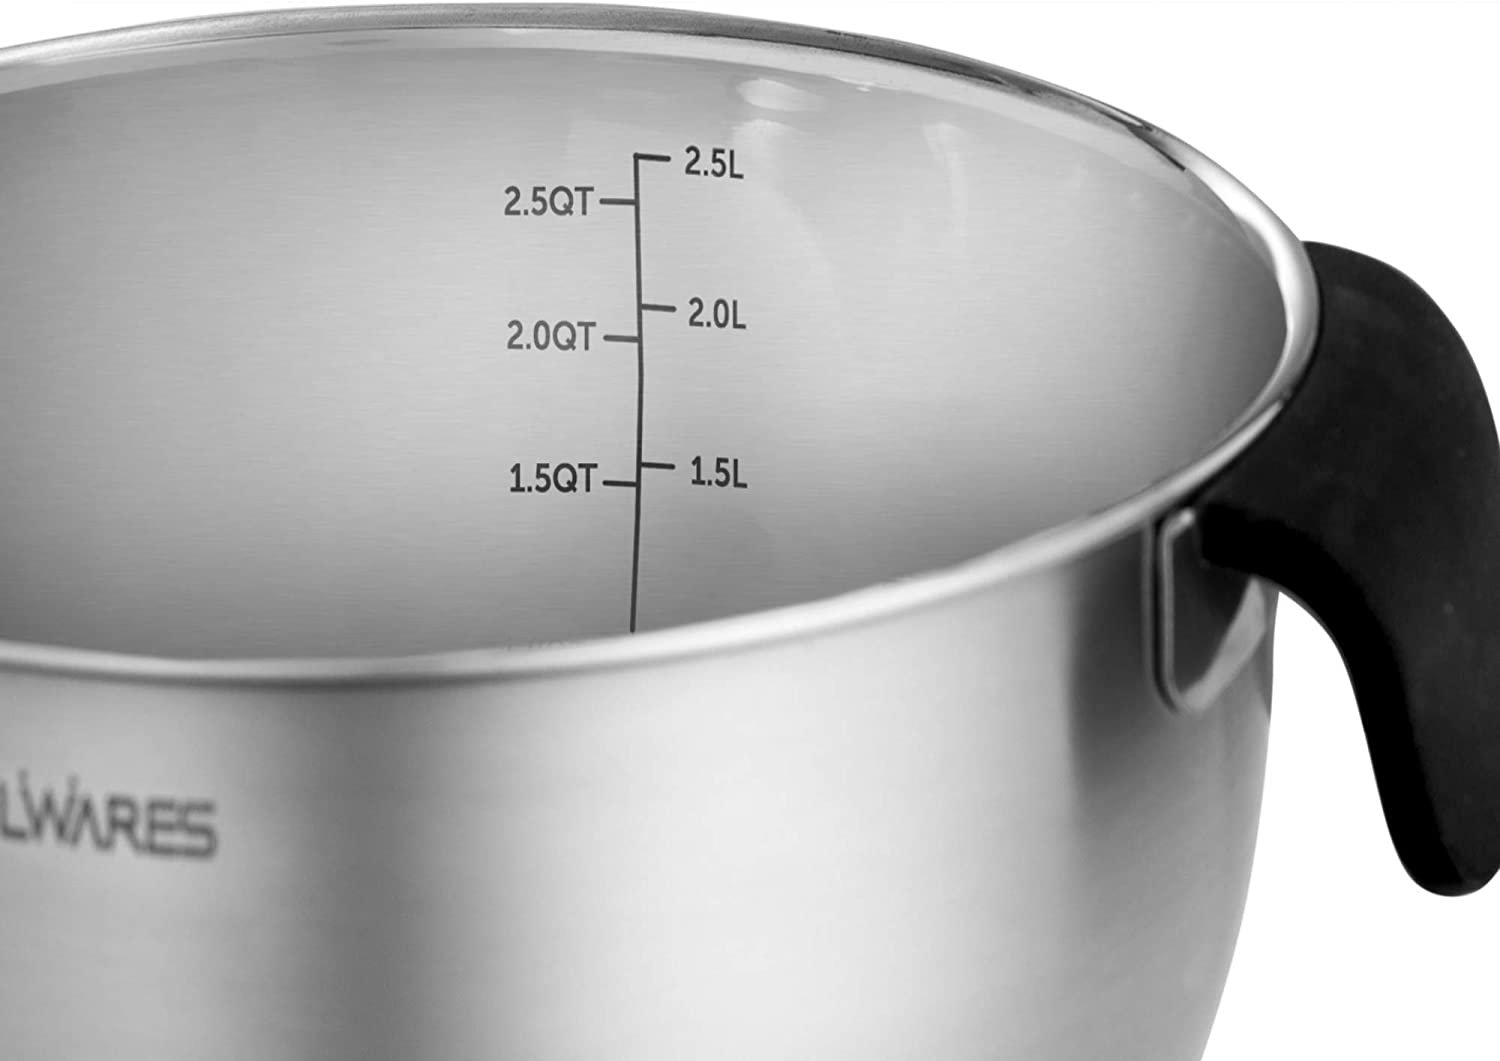 HAPPY KIT Mixing Bowls with Lids Set of 2,Stainless Steel Mixing Bowl with  Pour Spout, Non-slip Handle and Bottoms, 3 Grater Attachments, Measurement